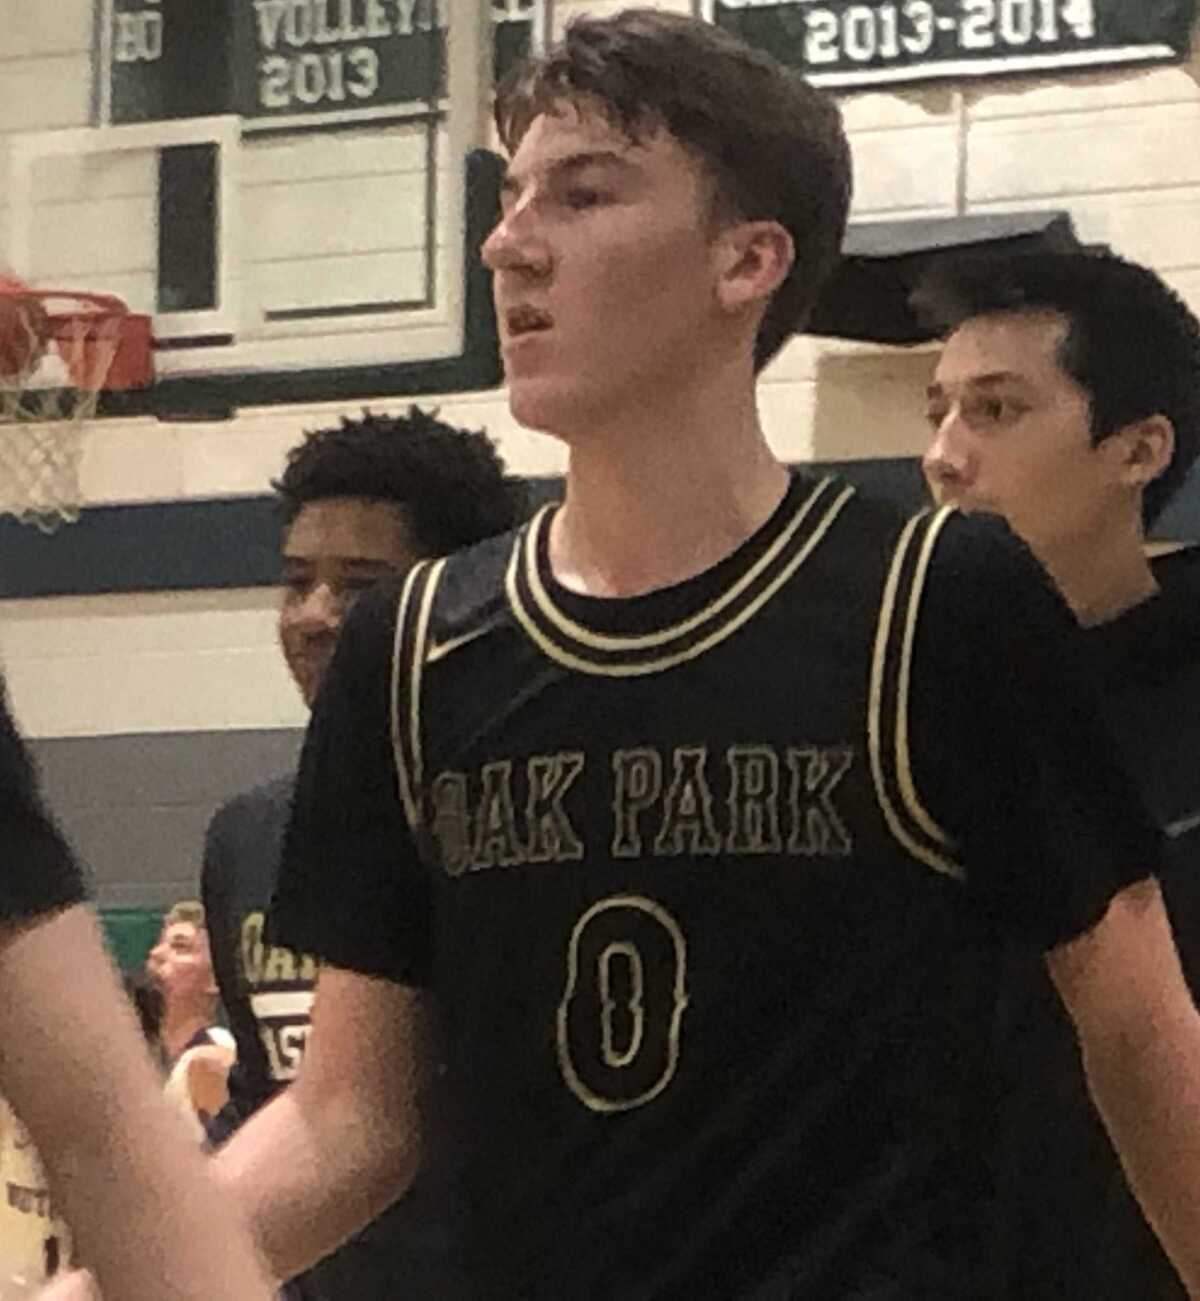 After averaging 30 points last season, senior guard Clark Slajchert of Oak Park began the new basketball season with 39 points and eight assists in a 69-41 win over West Ranch.